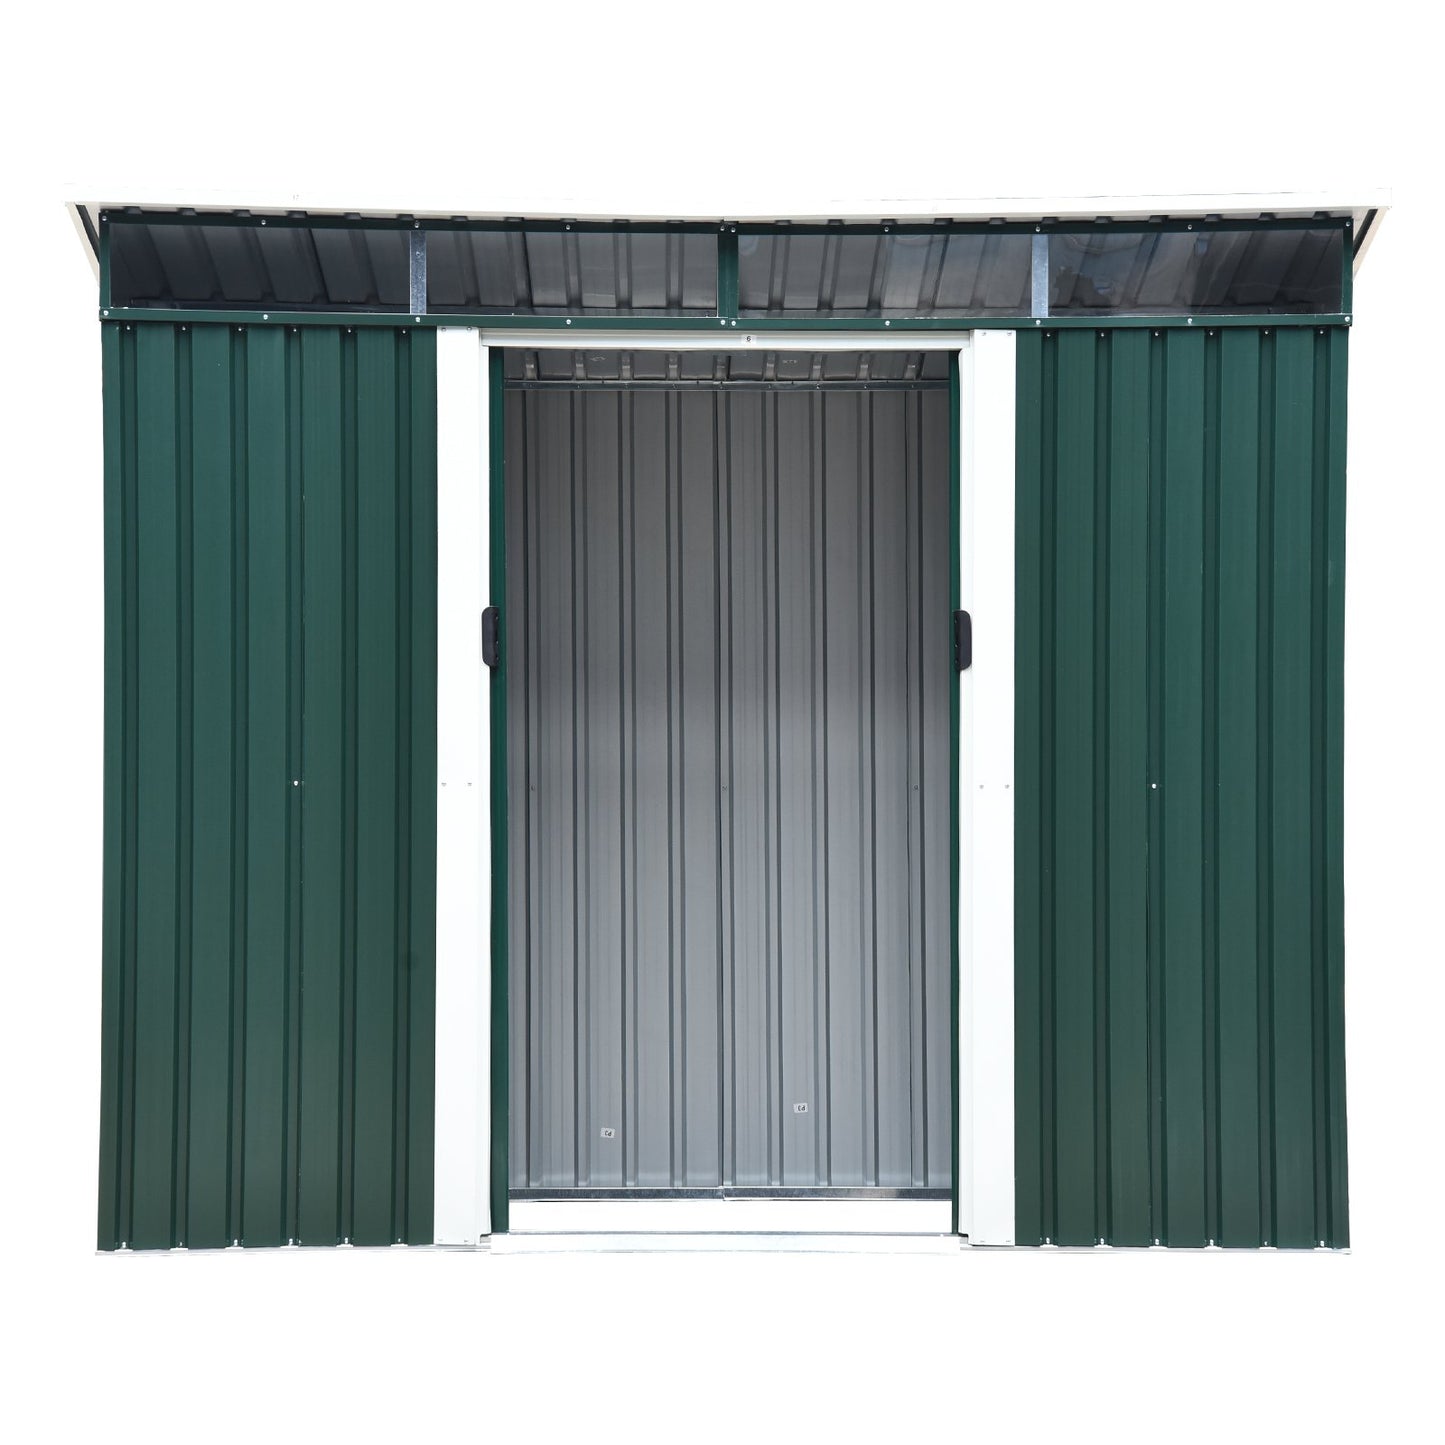 Outsunny 3.9 x 8ft Corrugated Steel Garden Shed - Green